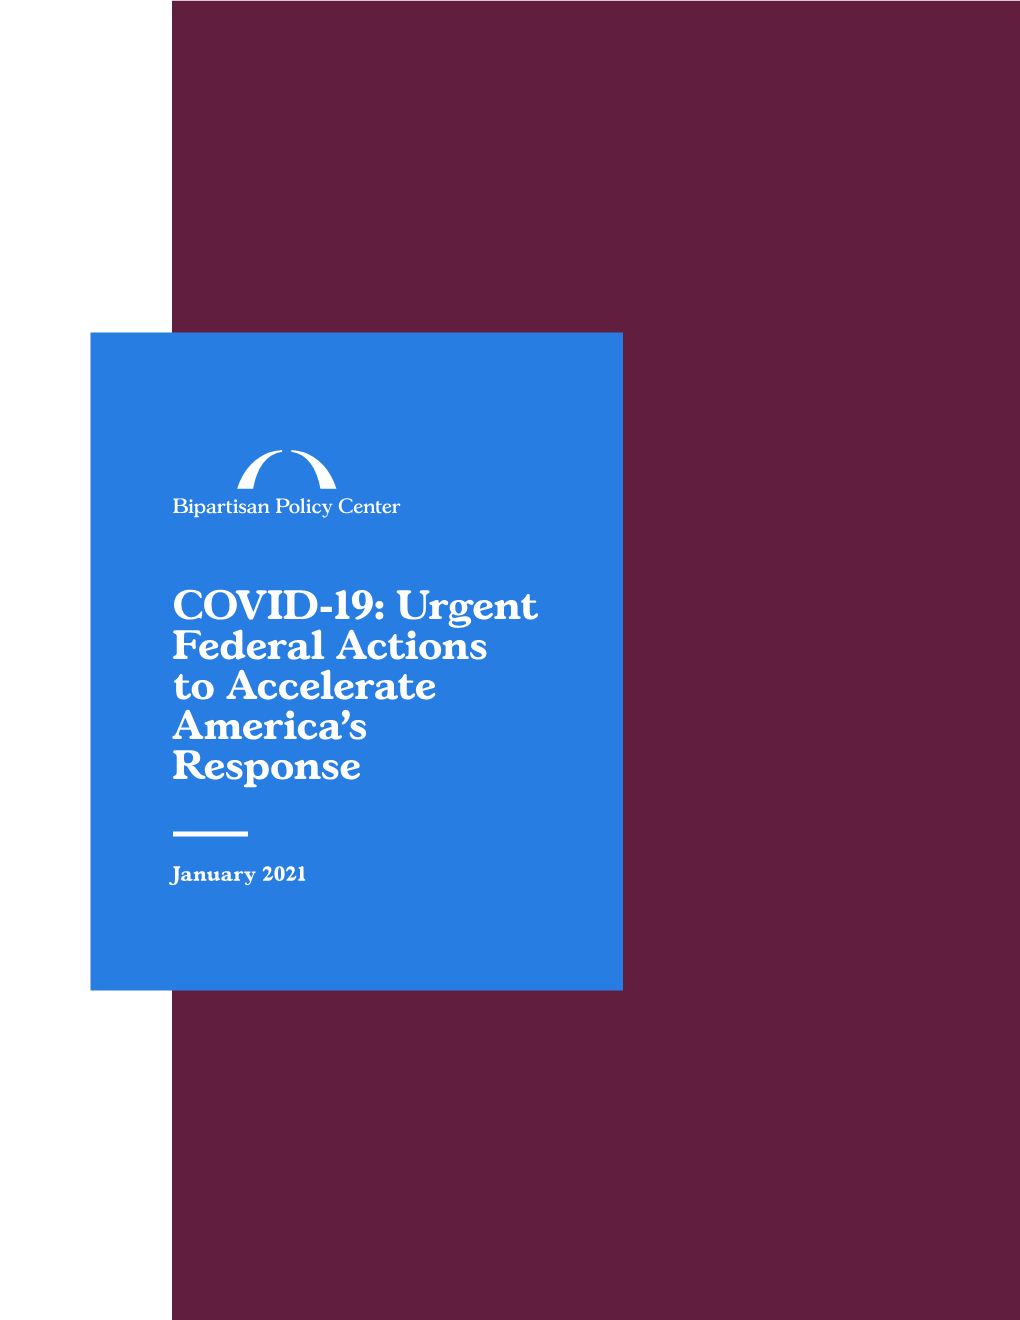 COVID-19: Urgent Federal Actions to Accelerate America's Response